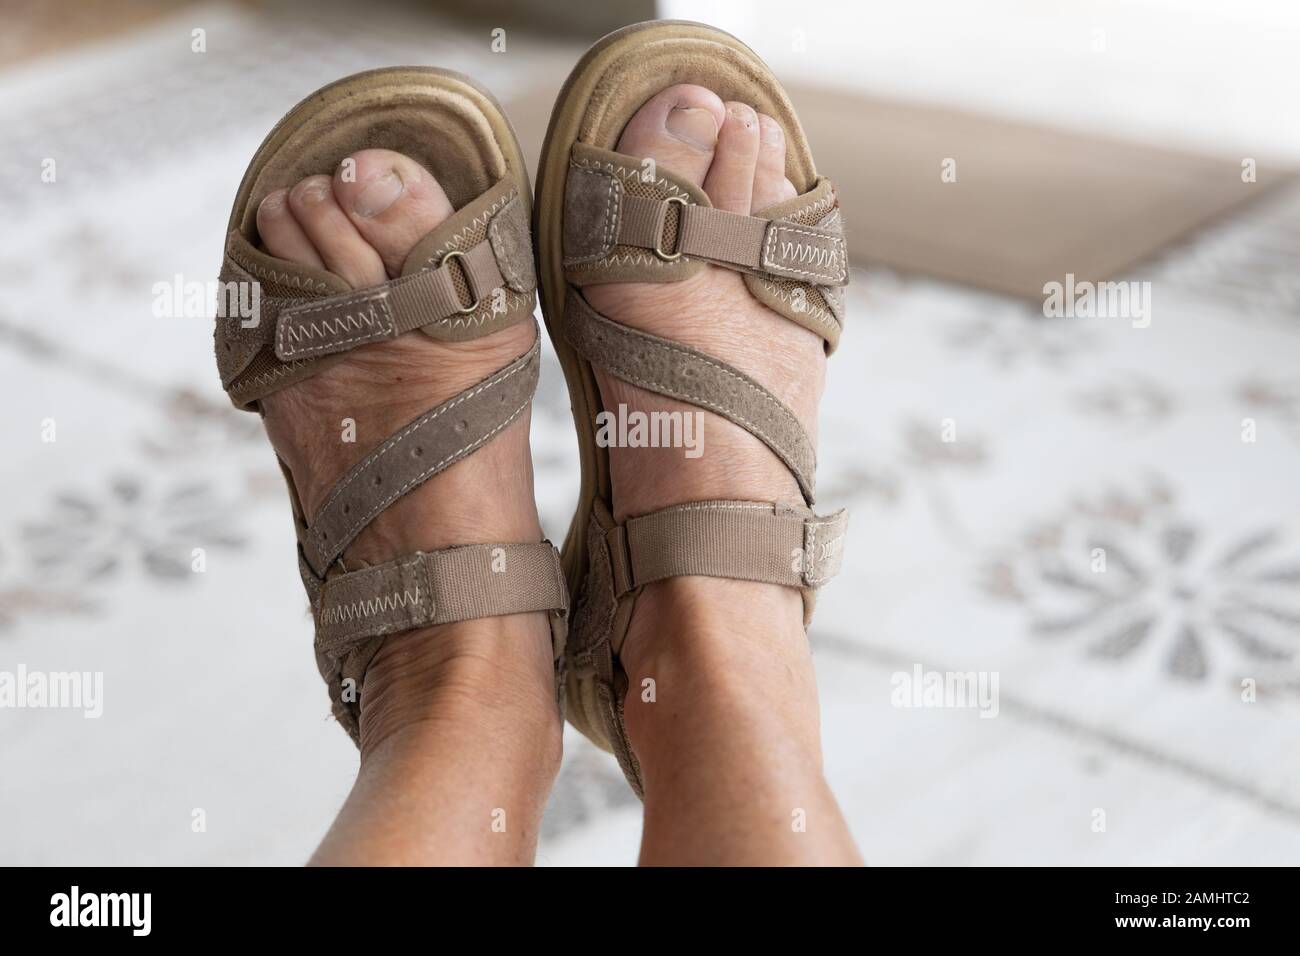 Close of woman's ugly feet wearing open toed sandals Stock Photo